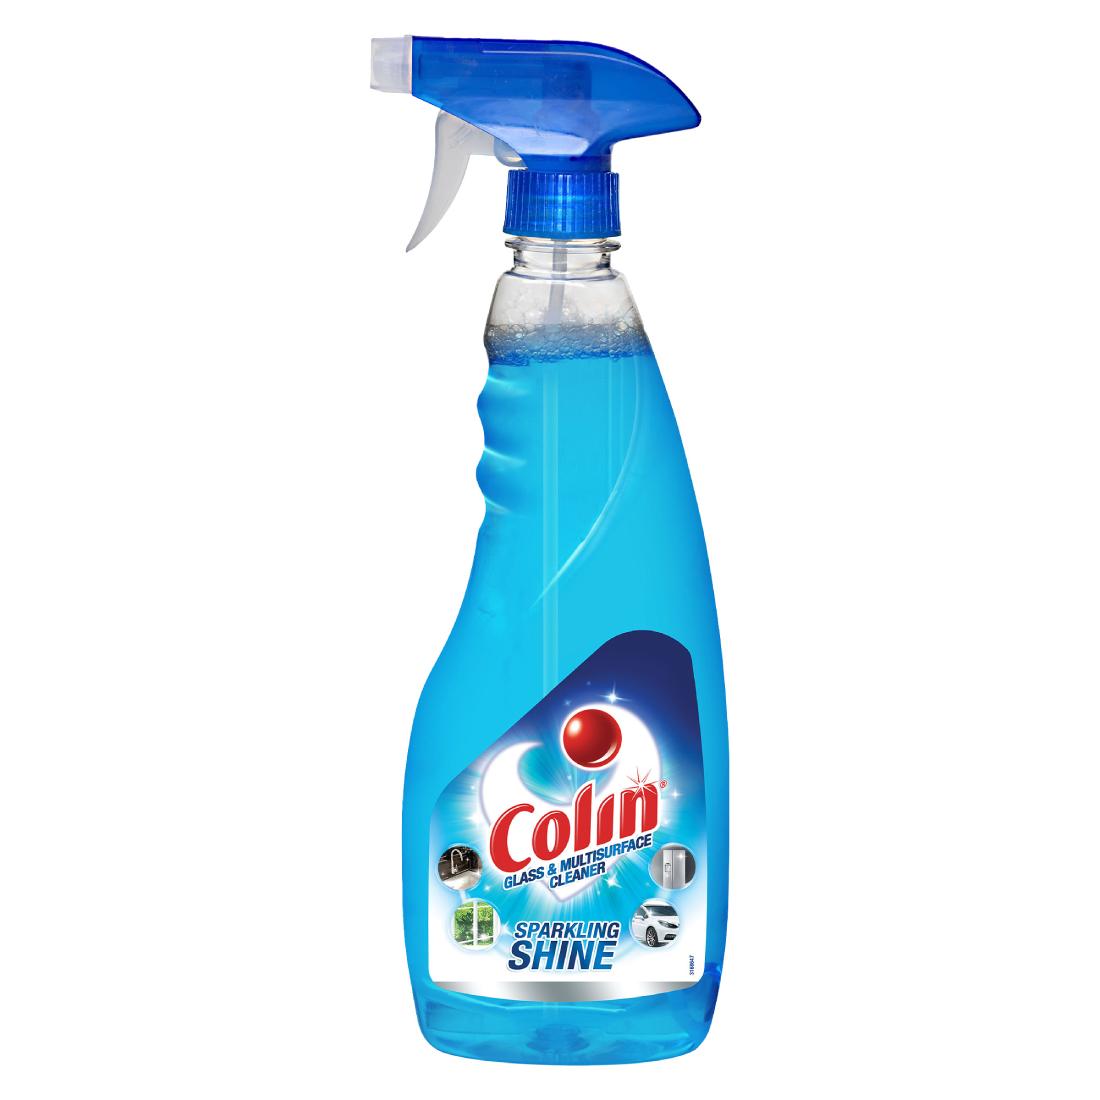 Colin Glass Cleaner Spray